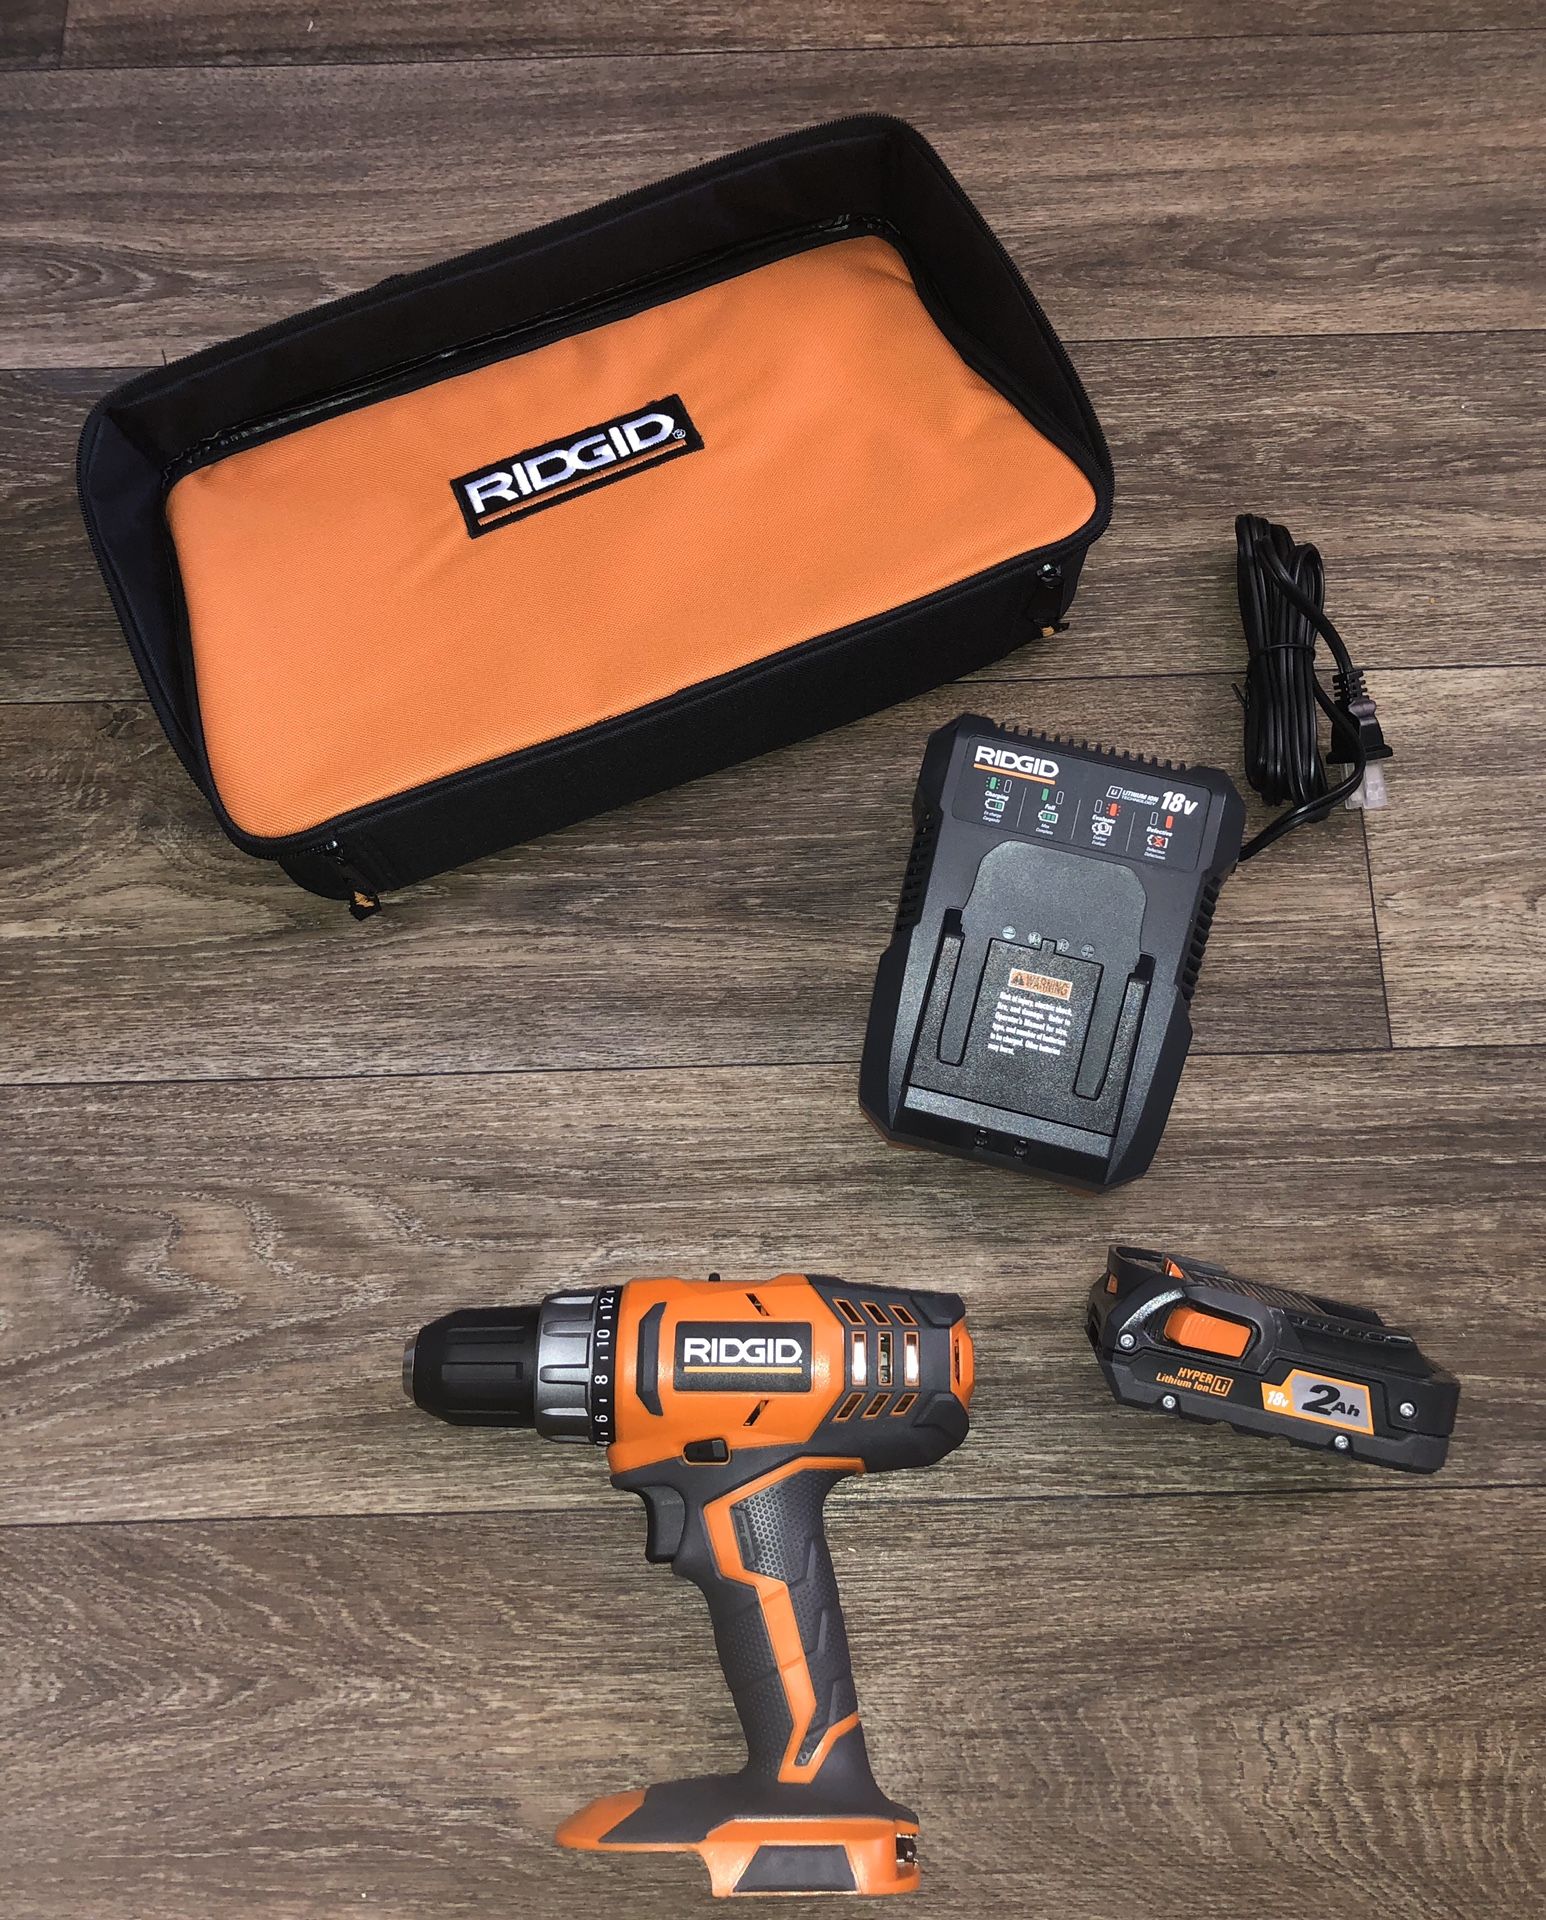 RIDGID 18-Volt Lithium-Ion Cordless 2-Speed 1/2 in. Compact Drill/Driver Kit with (1) 2.0 Ah Batterie, Charger, and Tool Bag